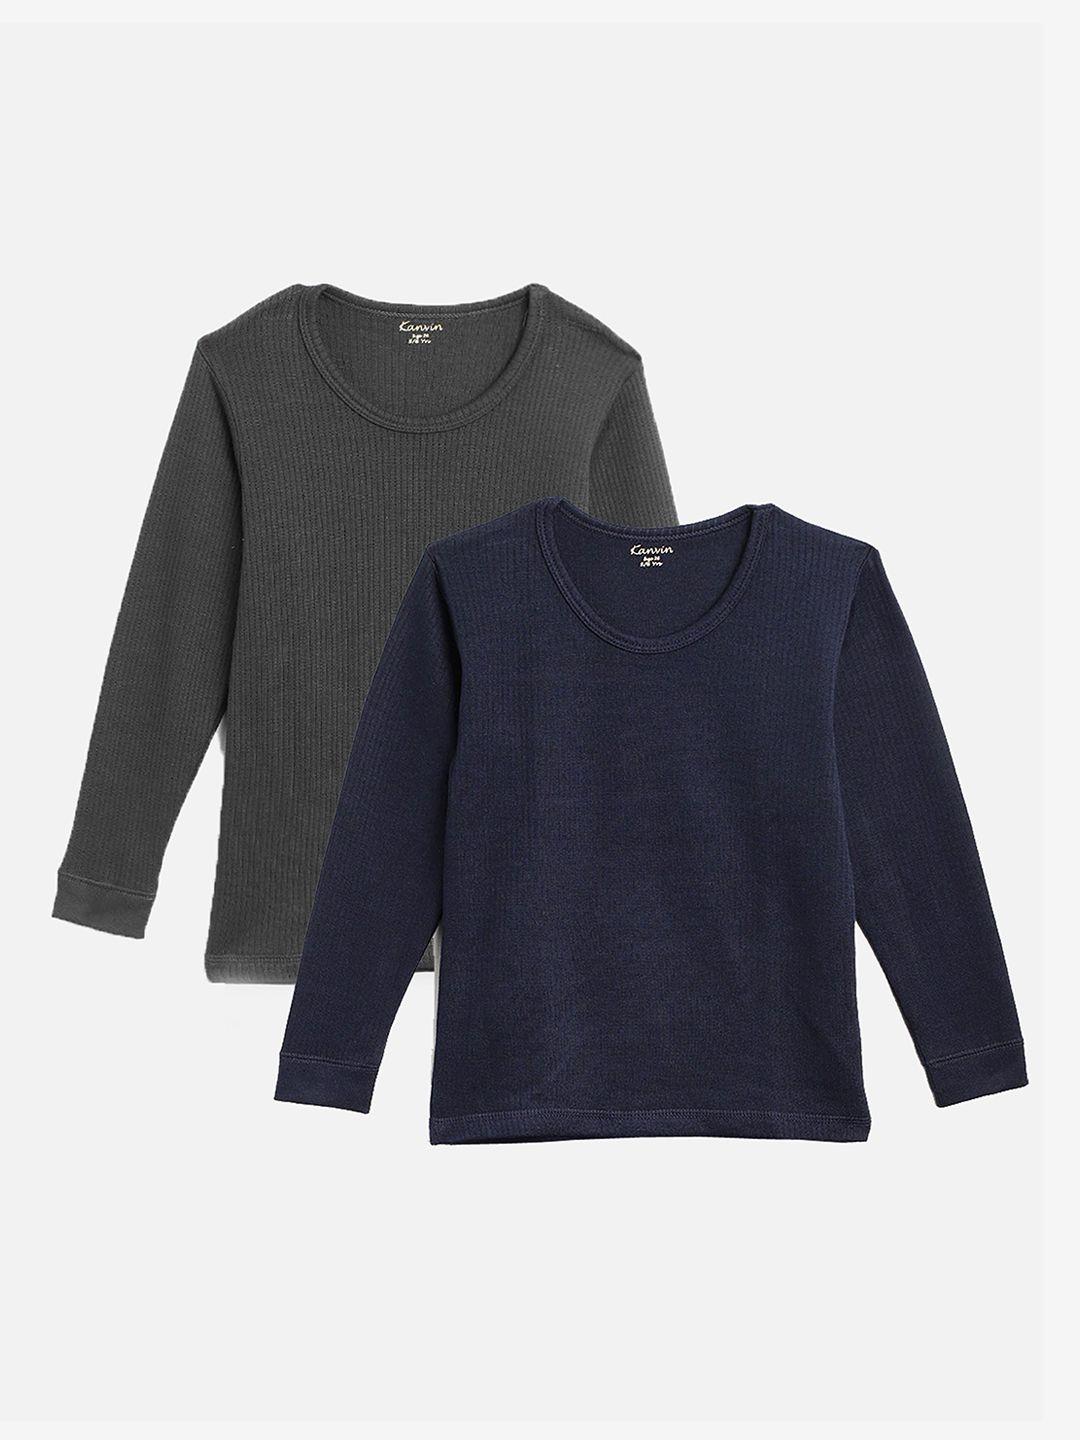 Kanvin Boys Pack Of 2 Charcoal & Navy Blue Ribbed Cotton Thermal Tops